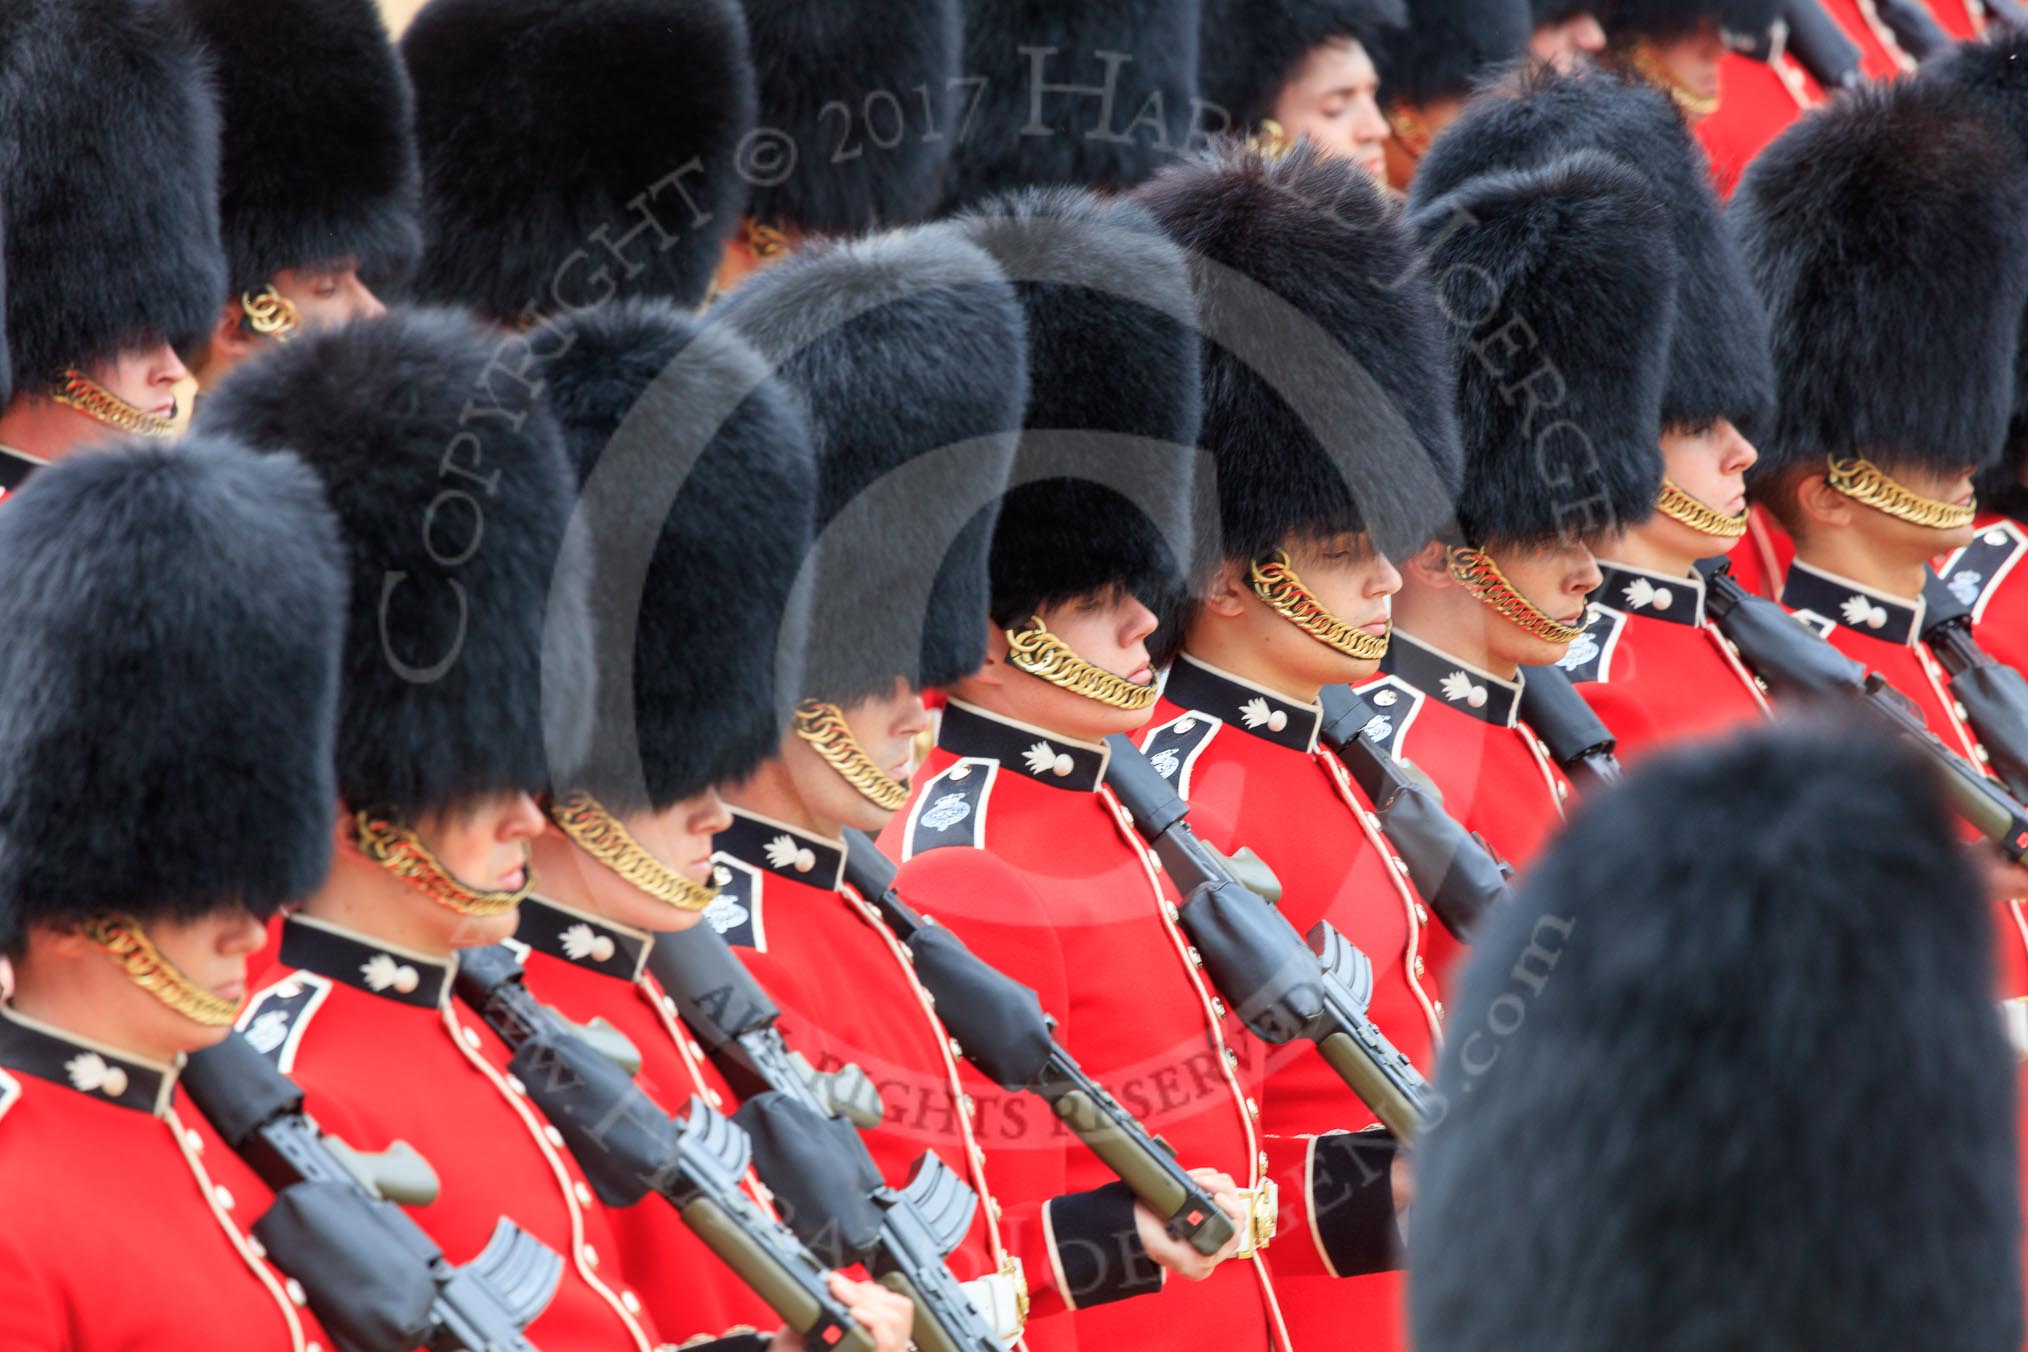 during The Colonel's Review {iptcyear4} (final rehearsal for Trooping the Colour, The Queen's Birthday Parade)  at Horse Guards Parade, Westminster, London, 2 June 2018, 11:39.